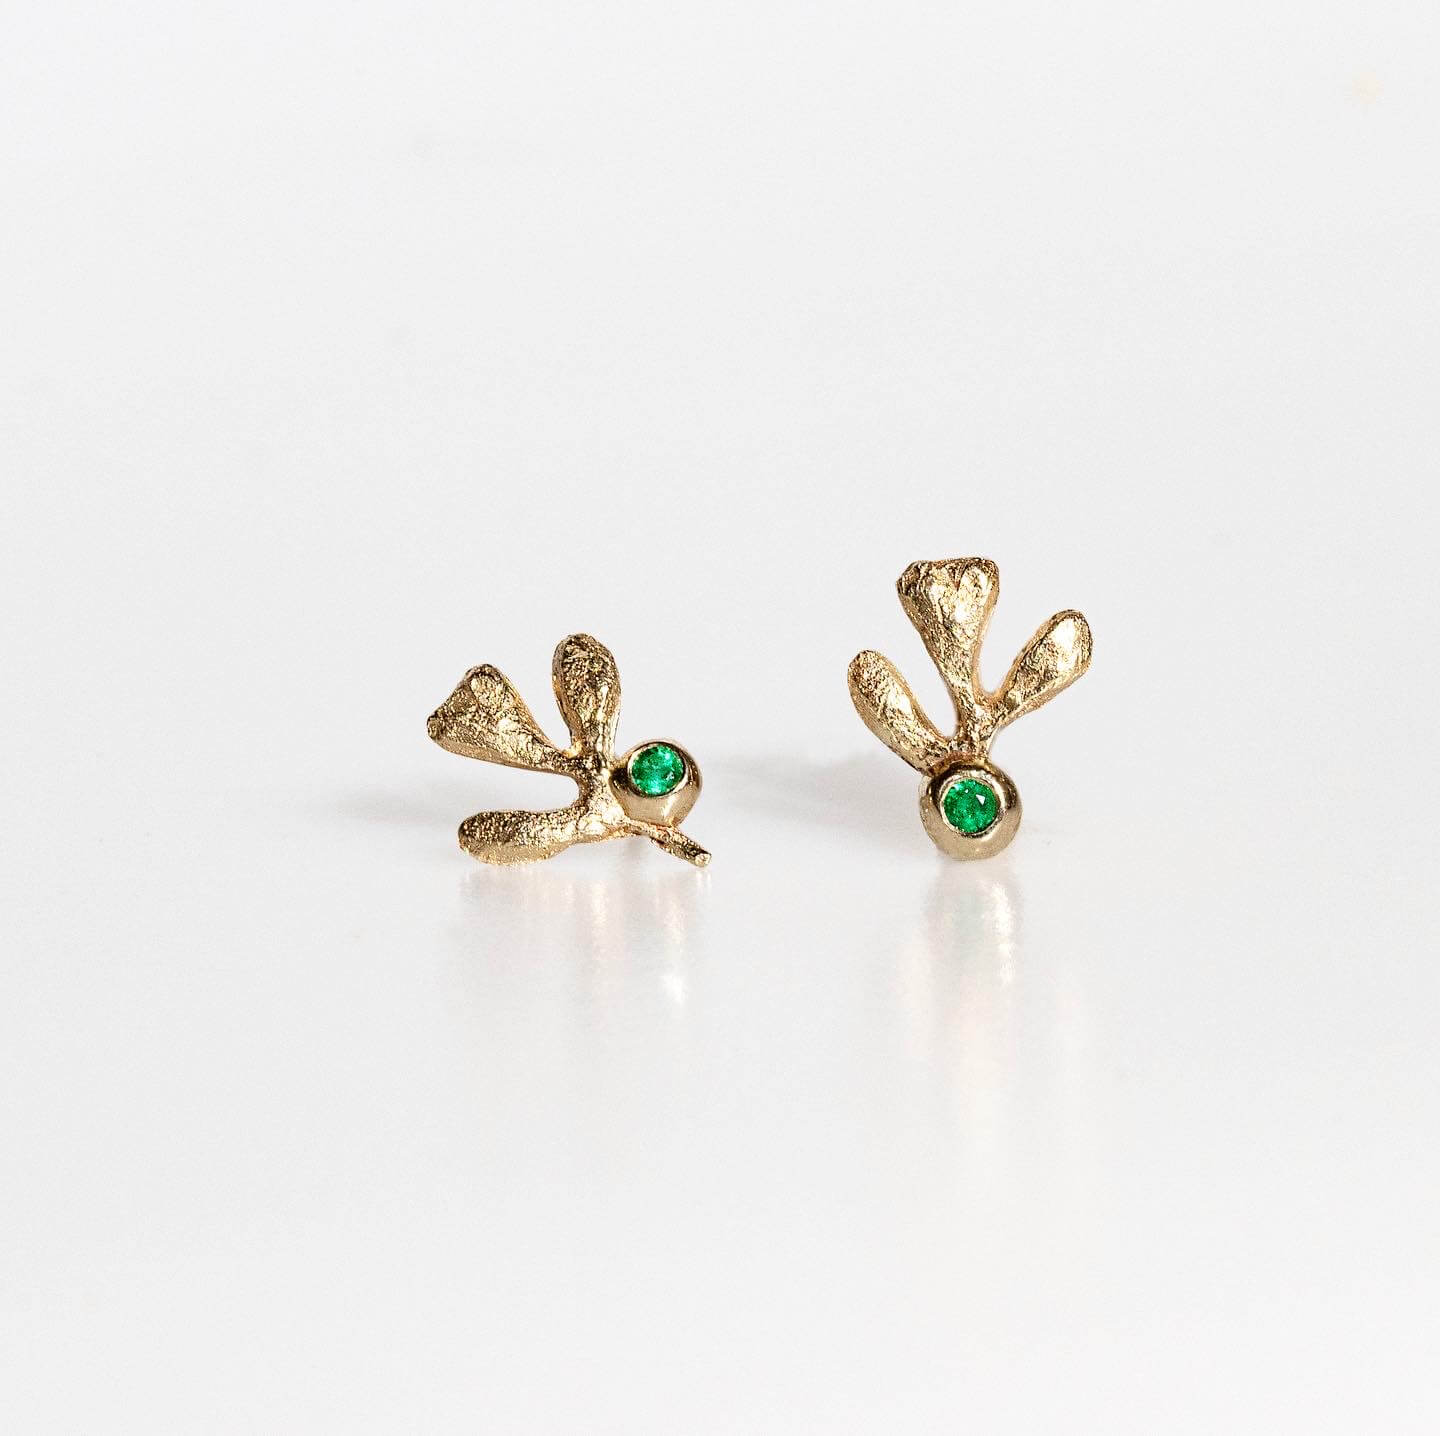 Ruth's earrings with Emeralds